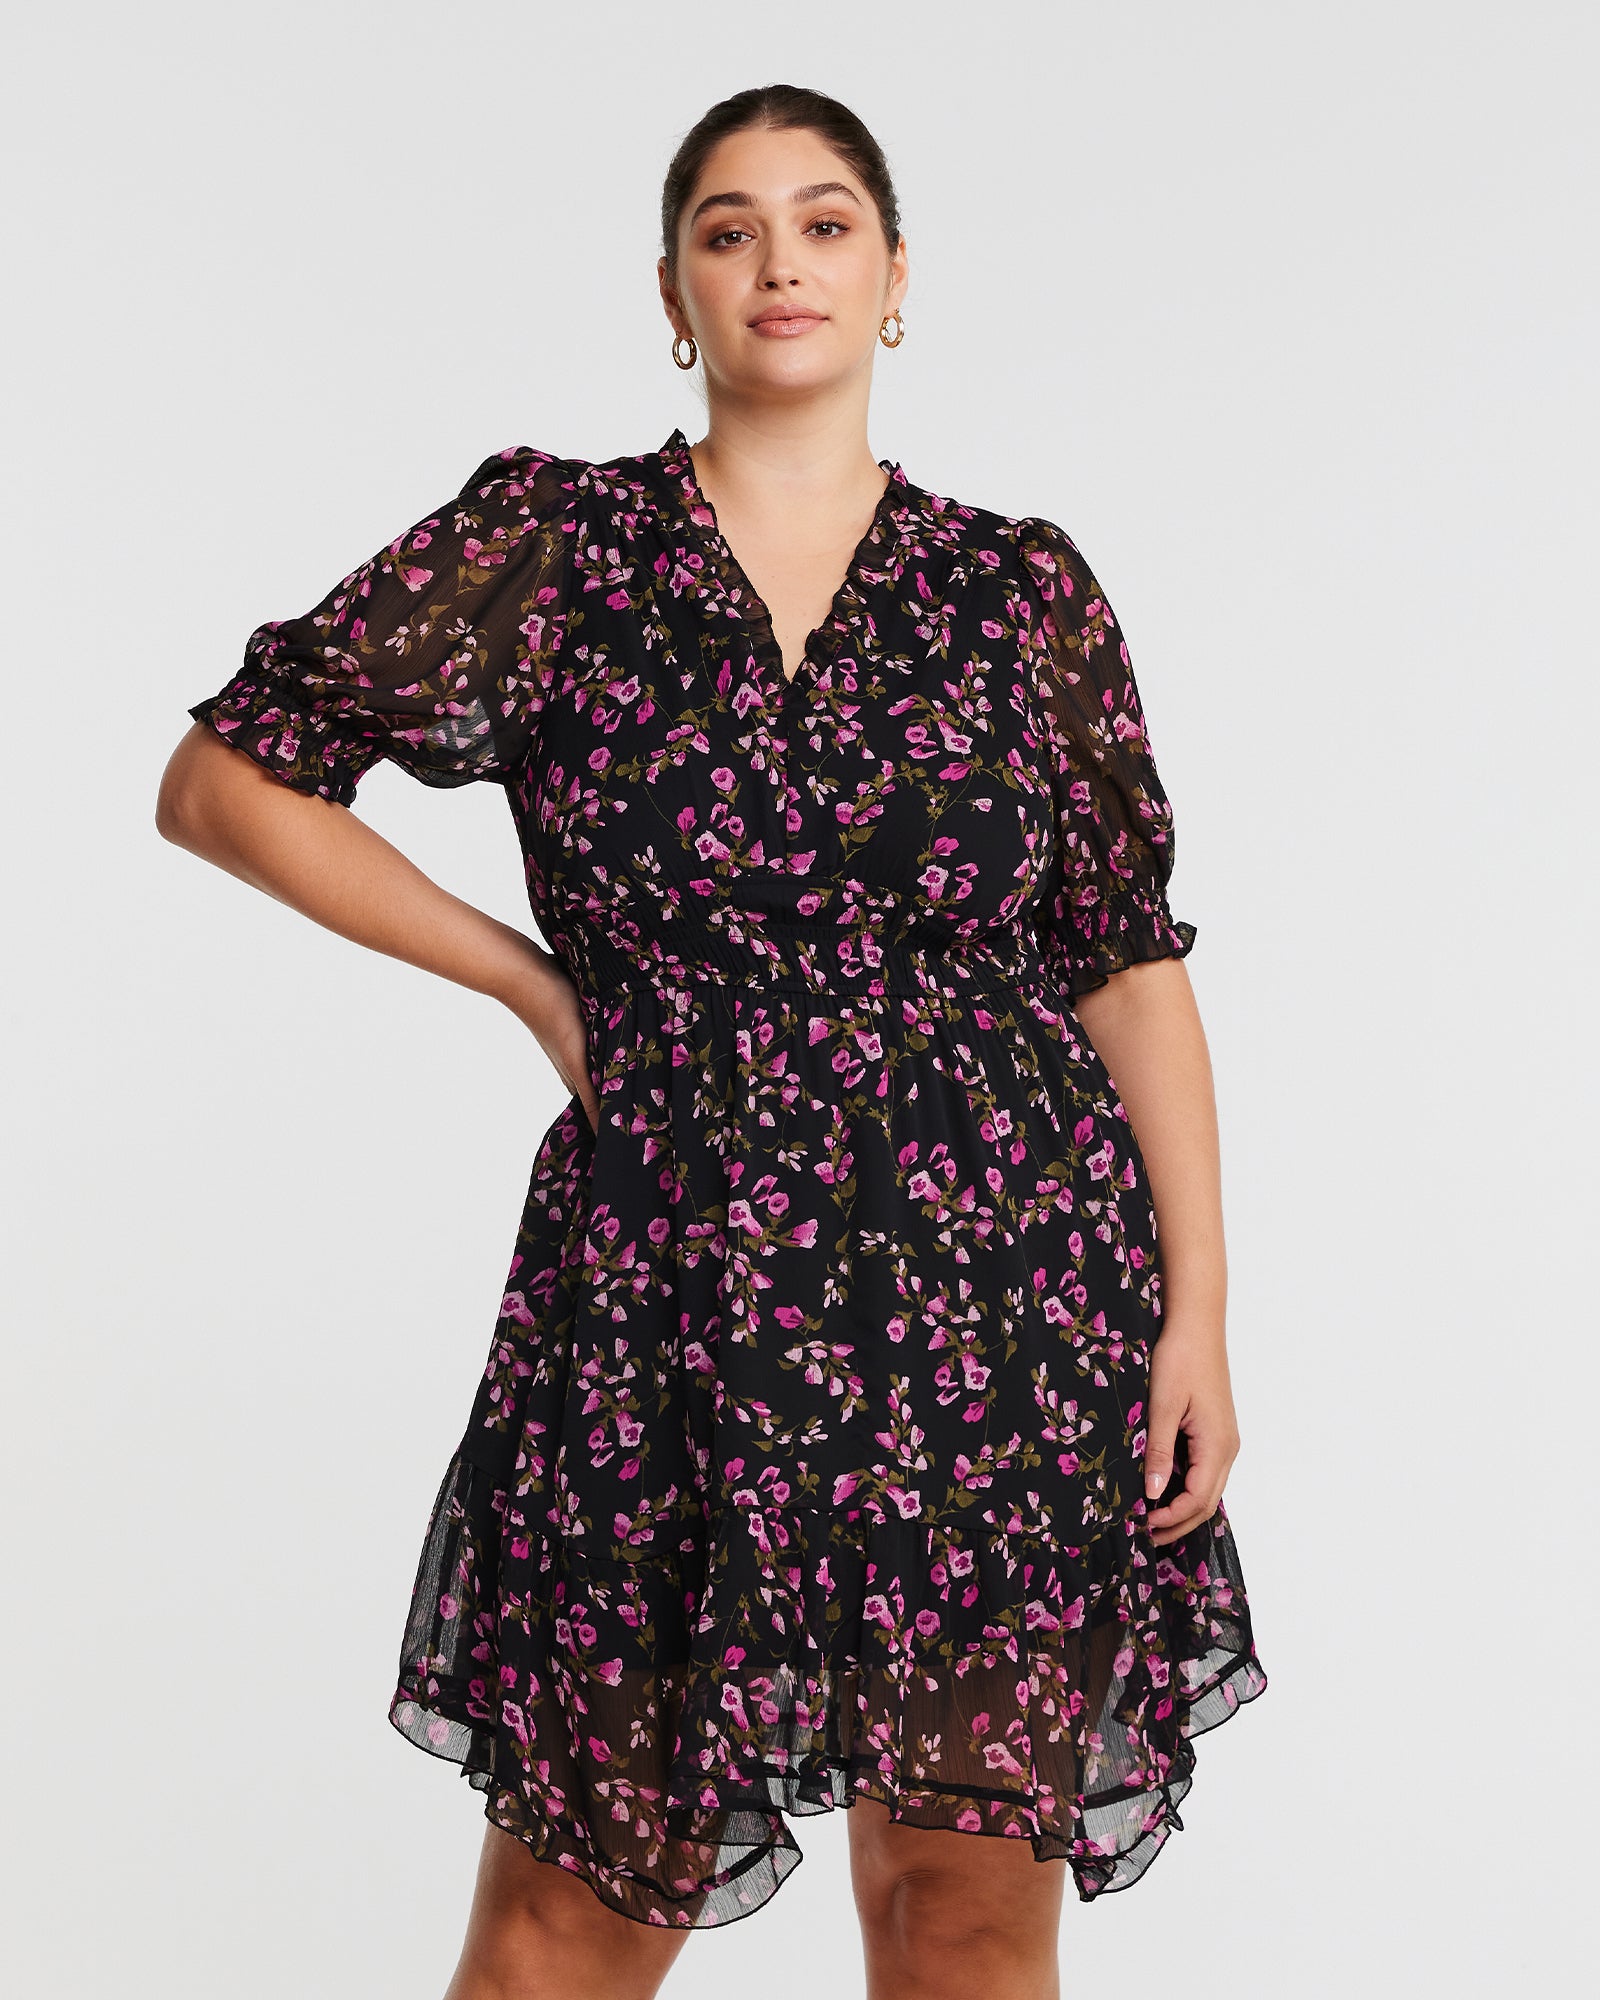 A plus size woman wearing the Tulip Garden Shirred Floral Mini Dress.